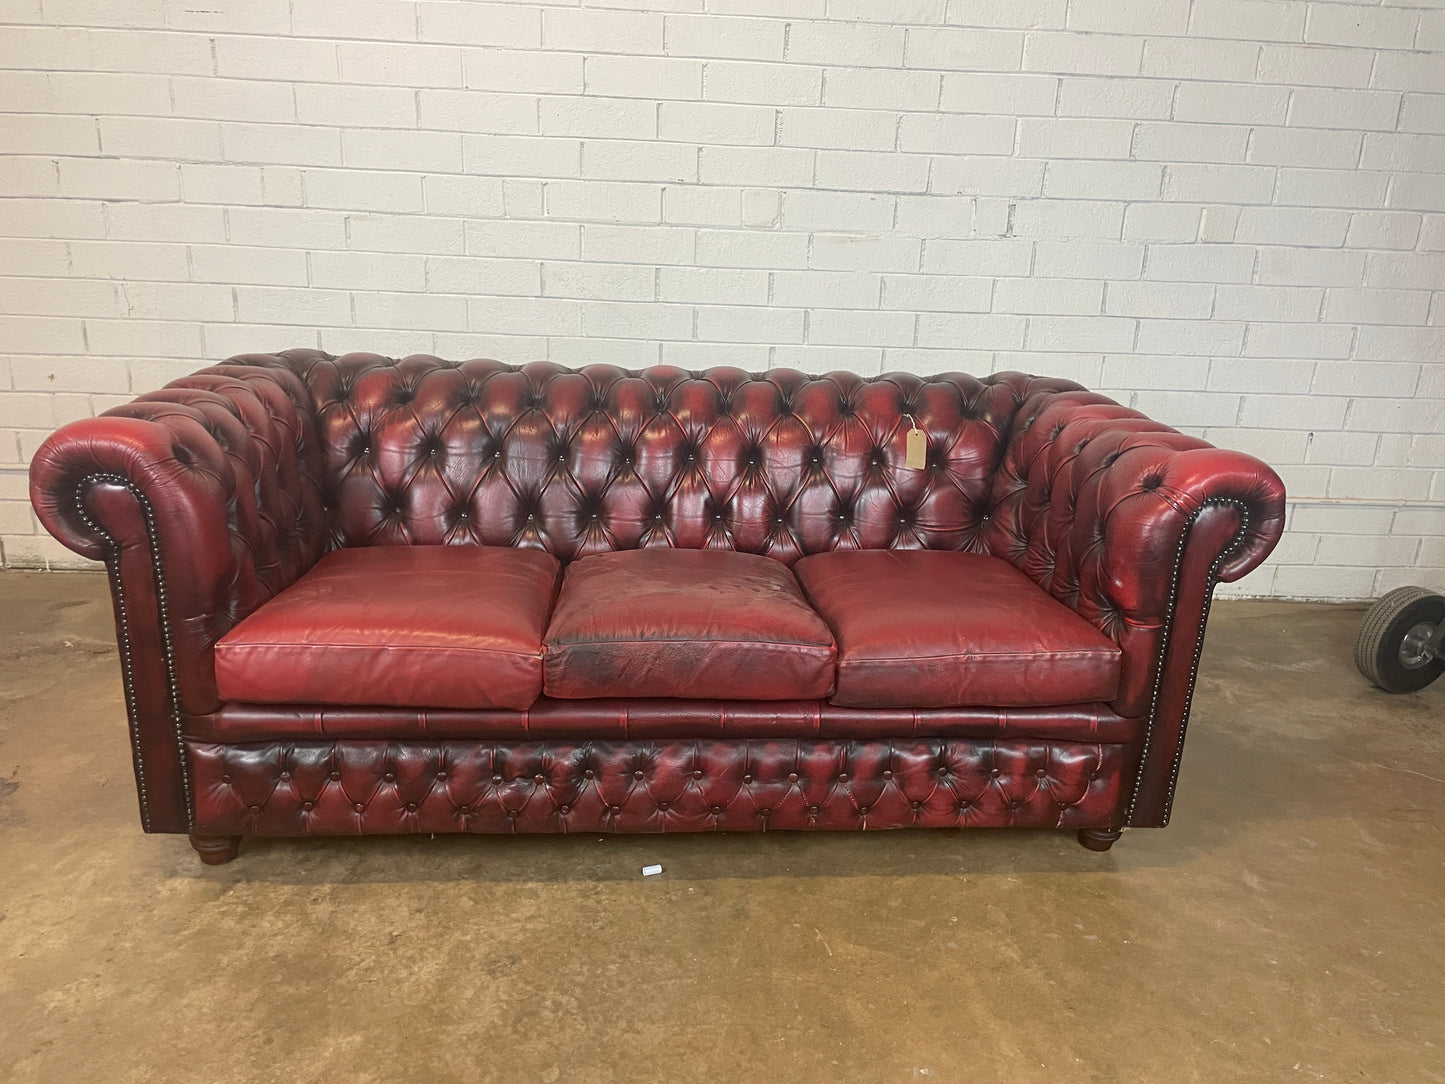 Ox Blood Leather Chesterfield Sofa